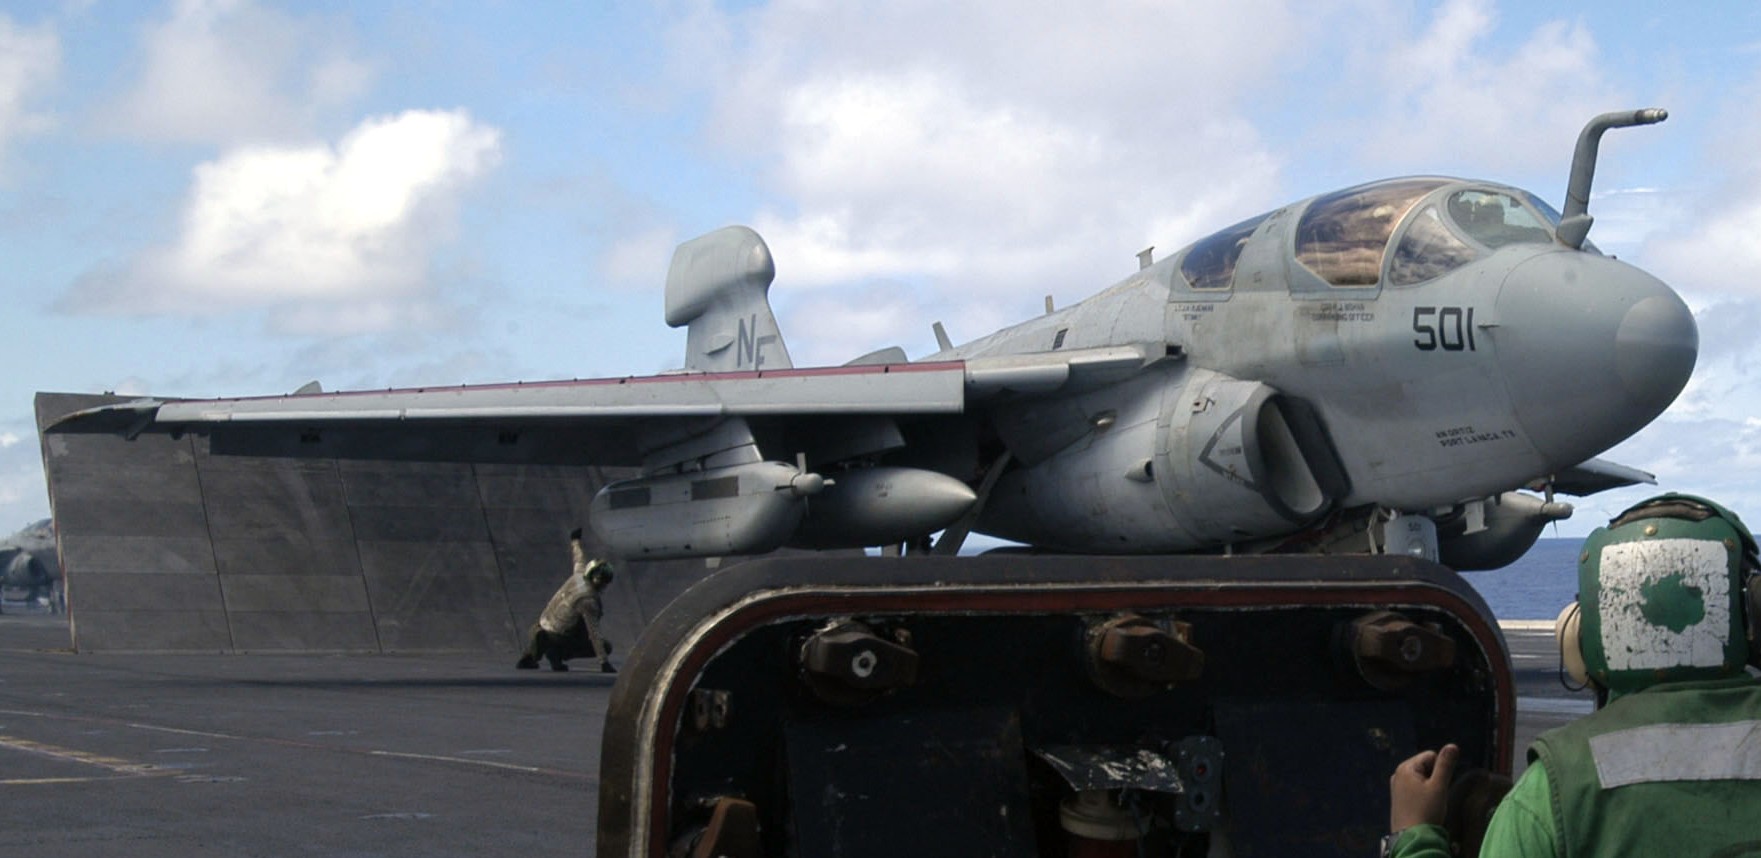 vaq-136 gauntlets electronic attack squadron vaqron us navy ea-6b prowler carrier air wing cvw-5 uss kitty hawk cv-63 47